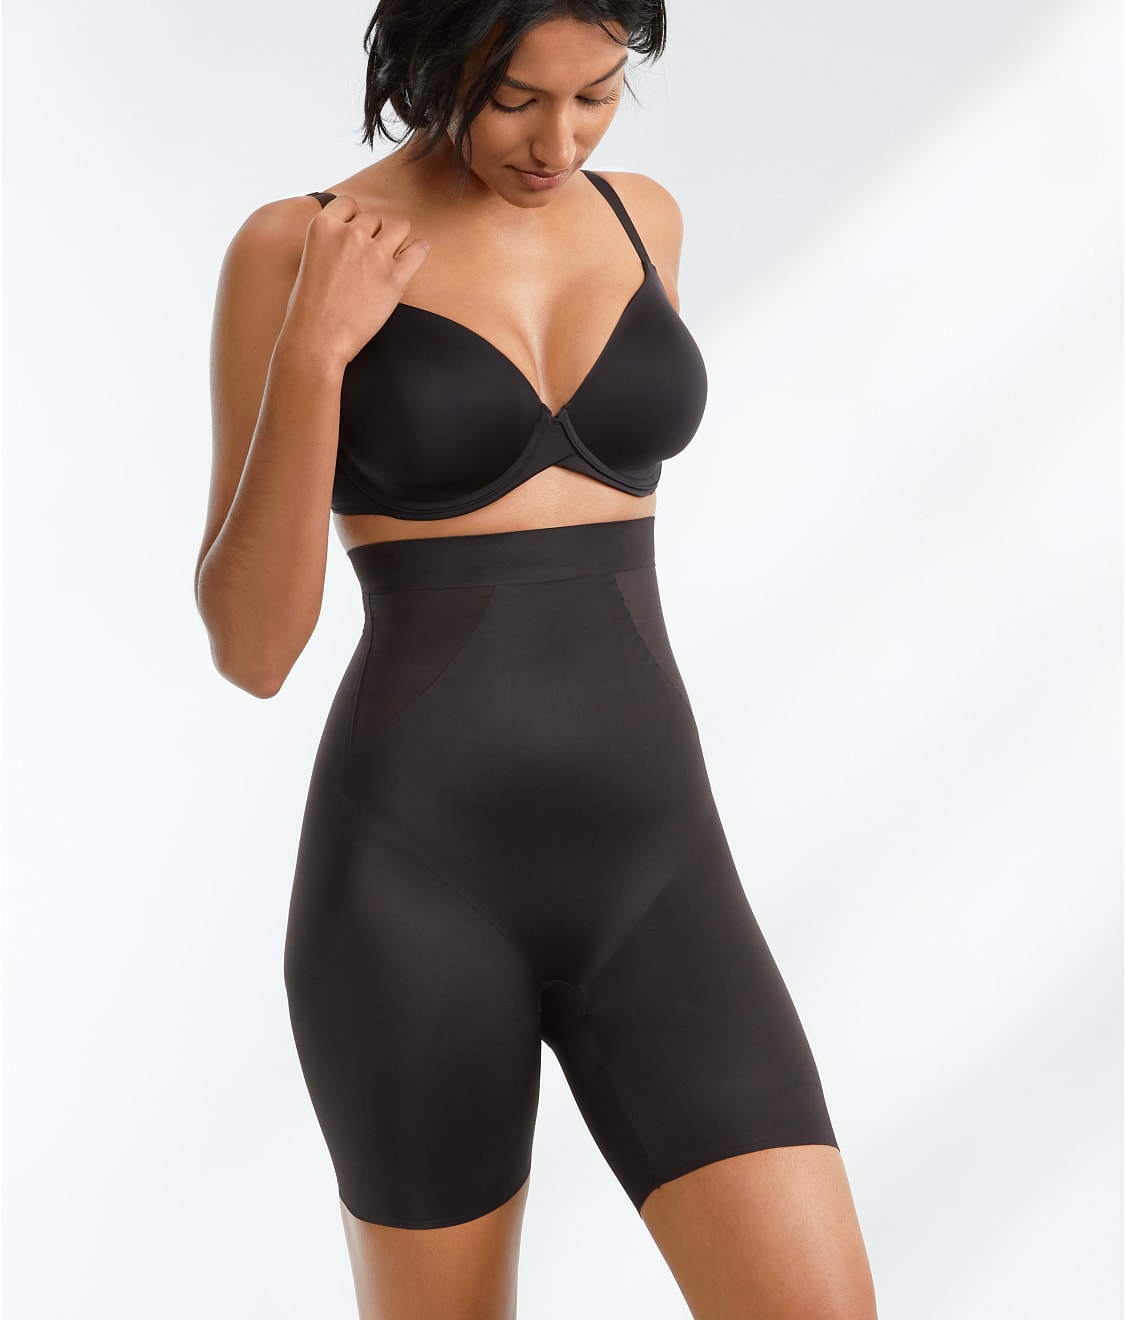 TC Fine Intimates Extra Firm Control Total Contour High-Waist Thigh Slimmer  & Reviews